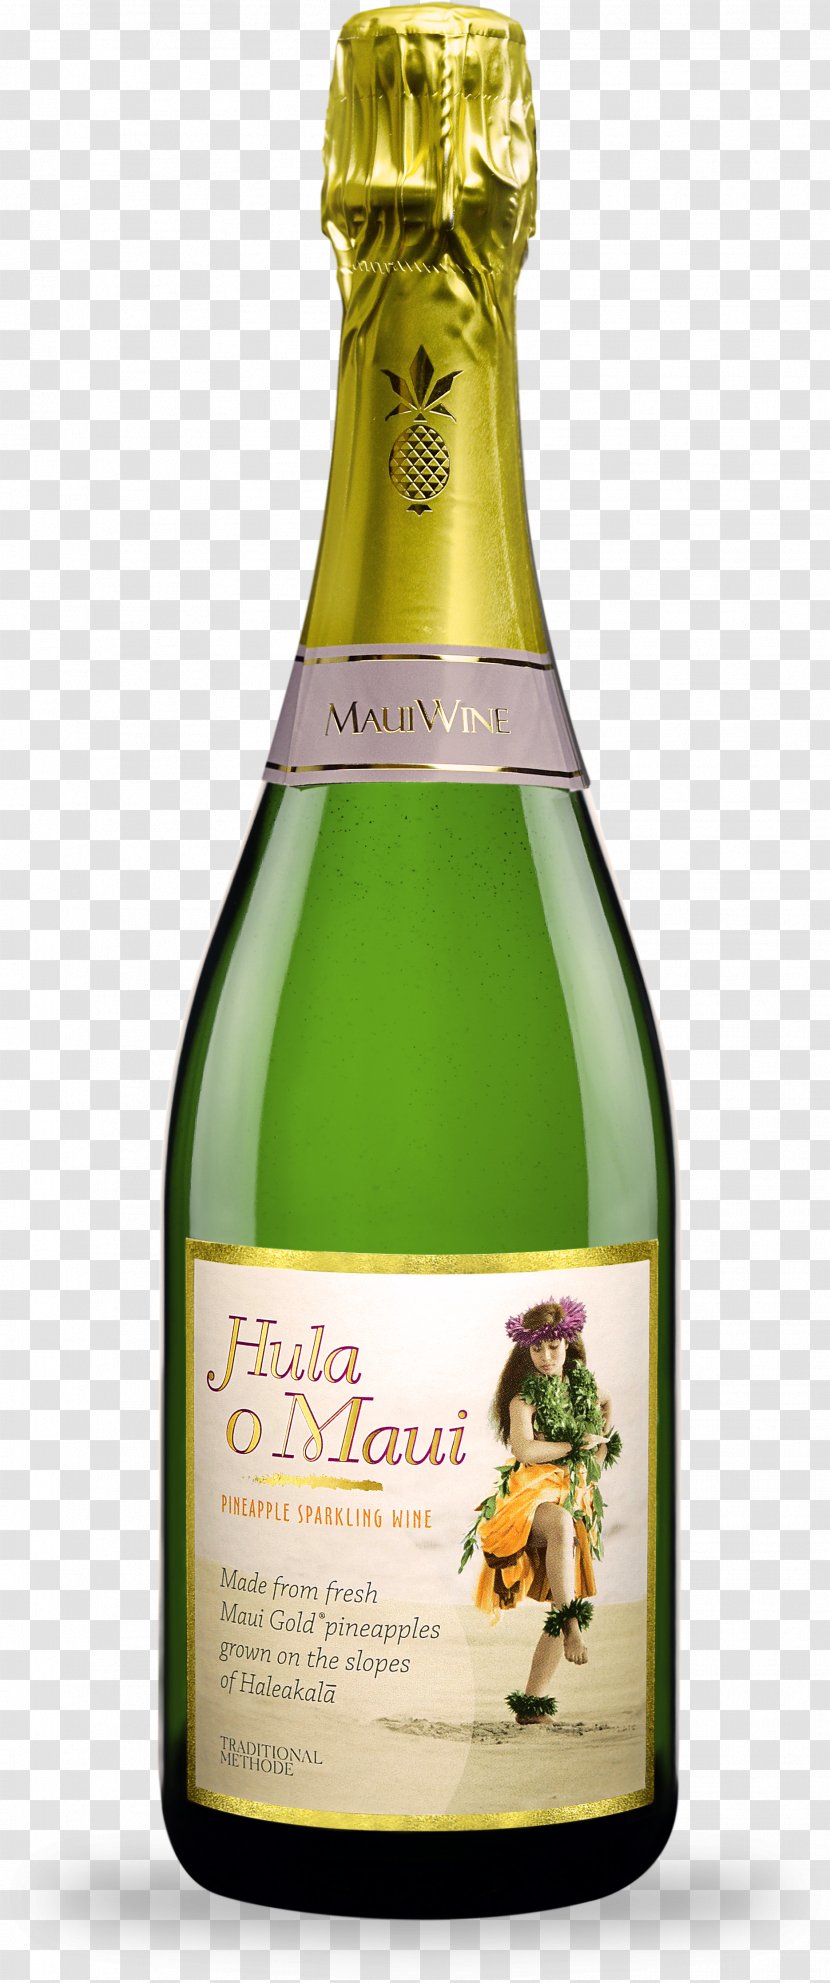 Champagne Sparkling Wine White Pinot Blanc - Pineapple - Shelf Talker Transparent PNG